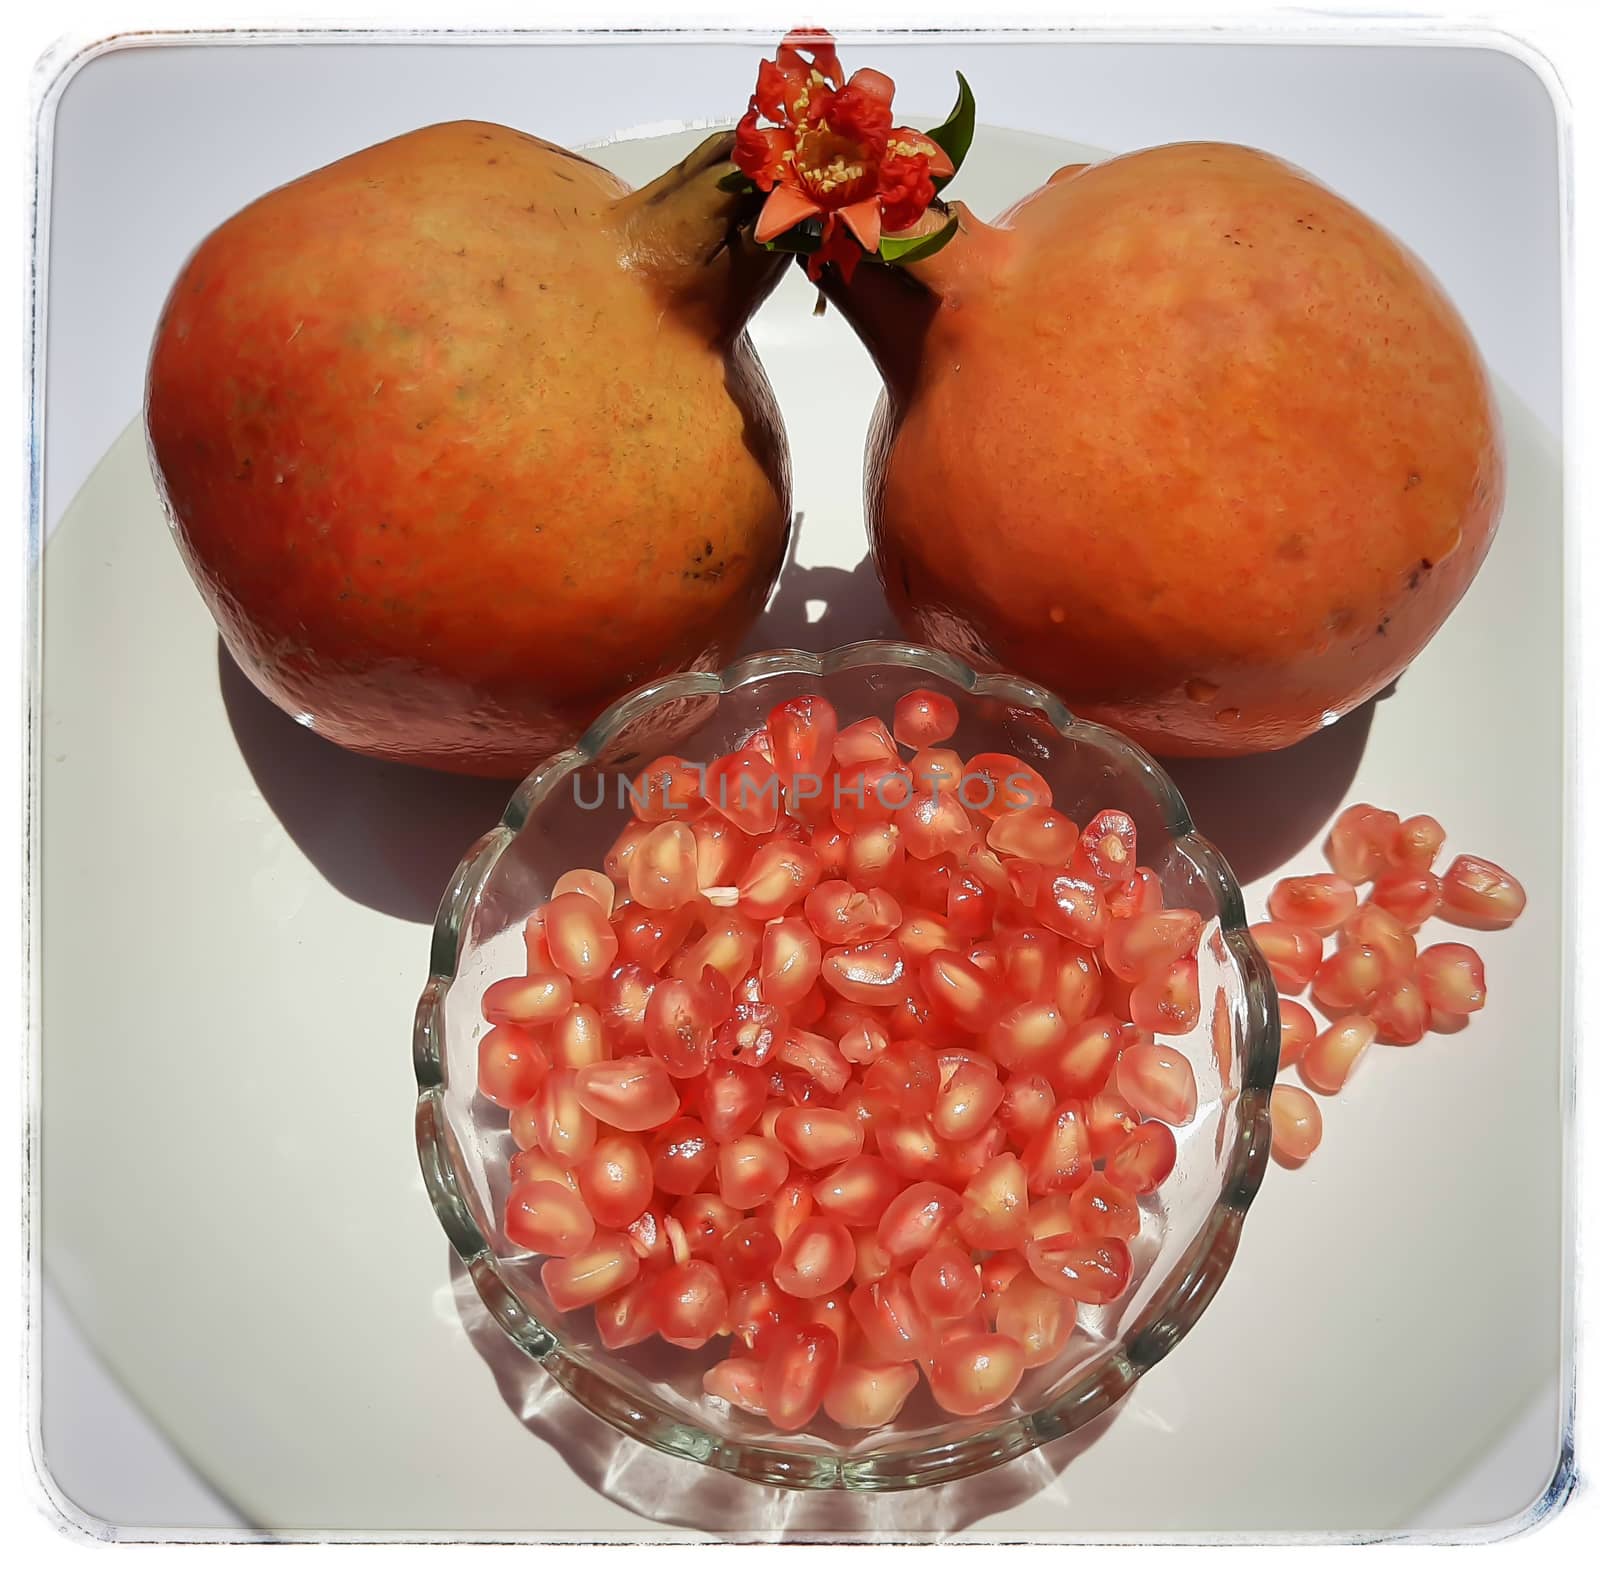 Two Pomegranate and Pomegranate seeds in bowl with shiny red “jewels” inside and its flower buds kept in bowl and placed beautifully in white plate